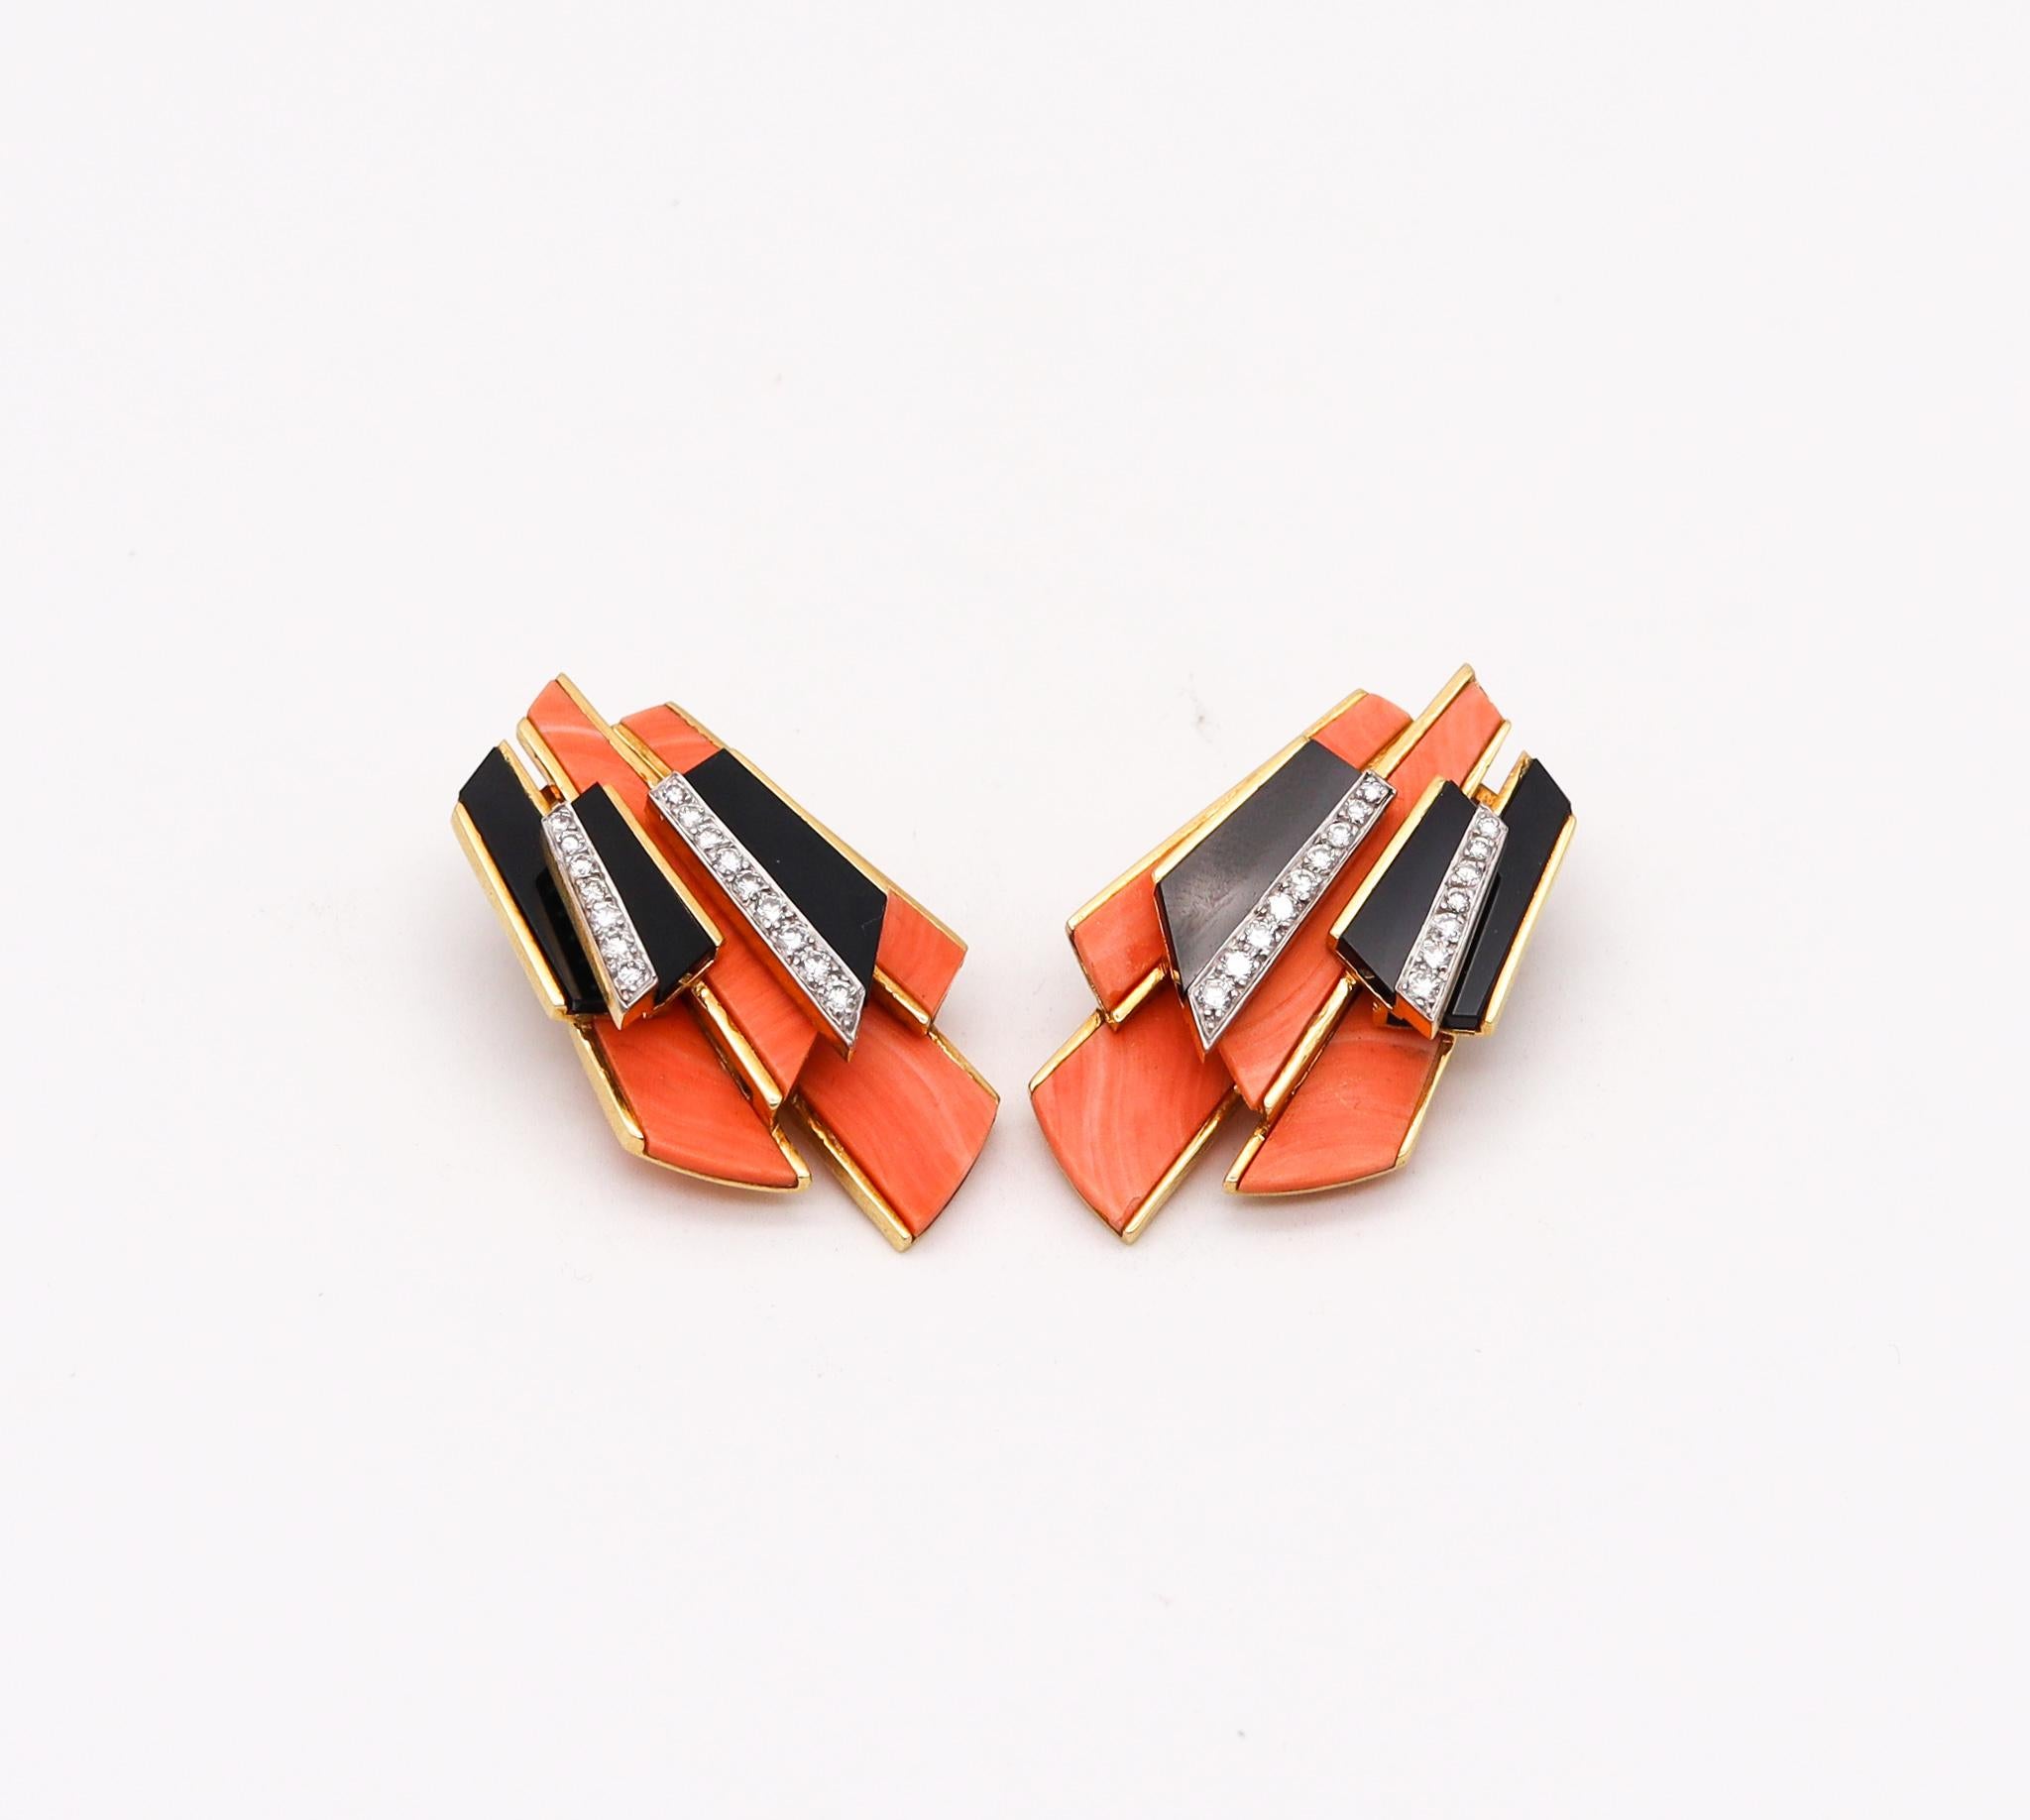 Pair of modernist earrings designed by Kutchinsky.

Exceptional and ultra modernist pair of earrings, created in London England by the iconic jewelry house of Kutchinsky, back in the 1968. These fabulous earrings are a one of a kind pieces, crafted